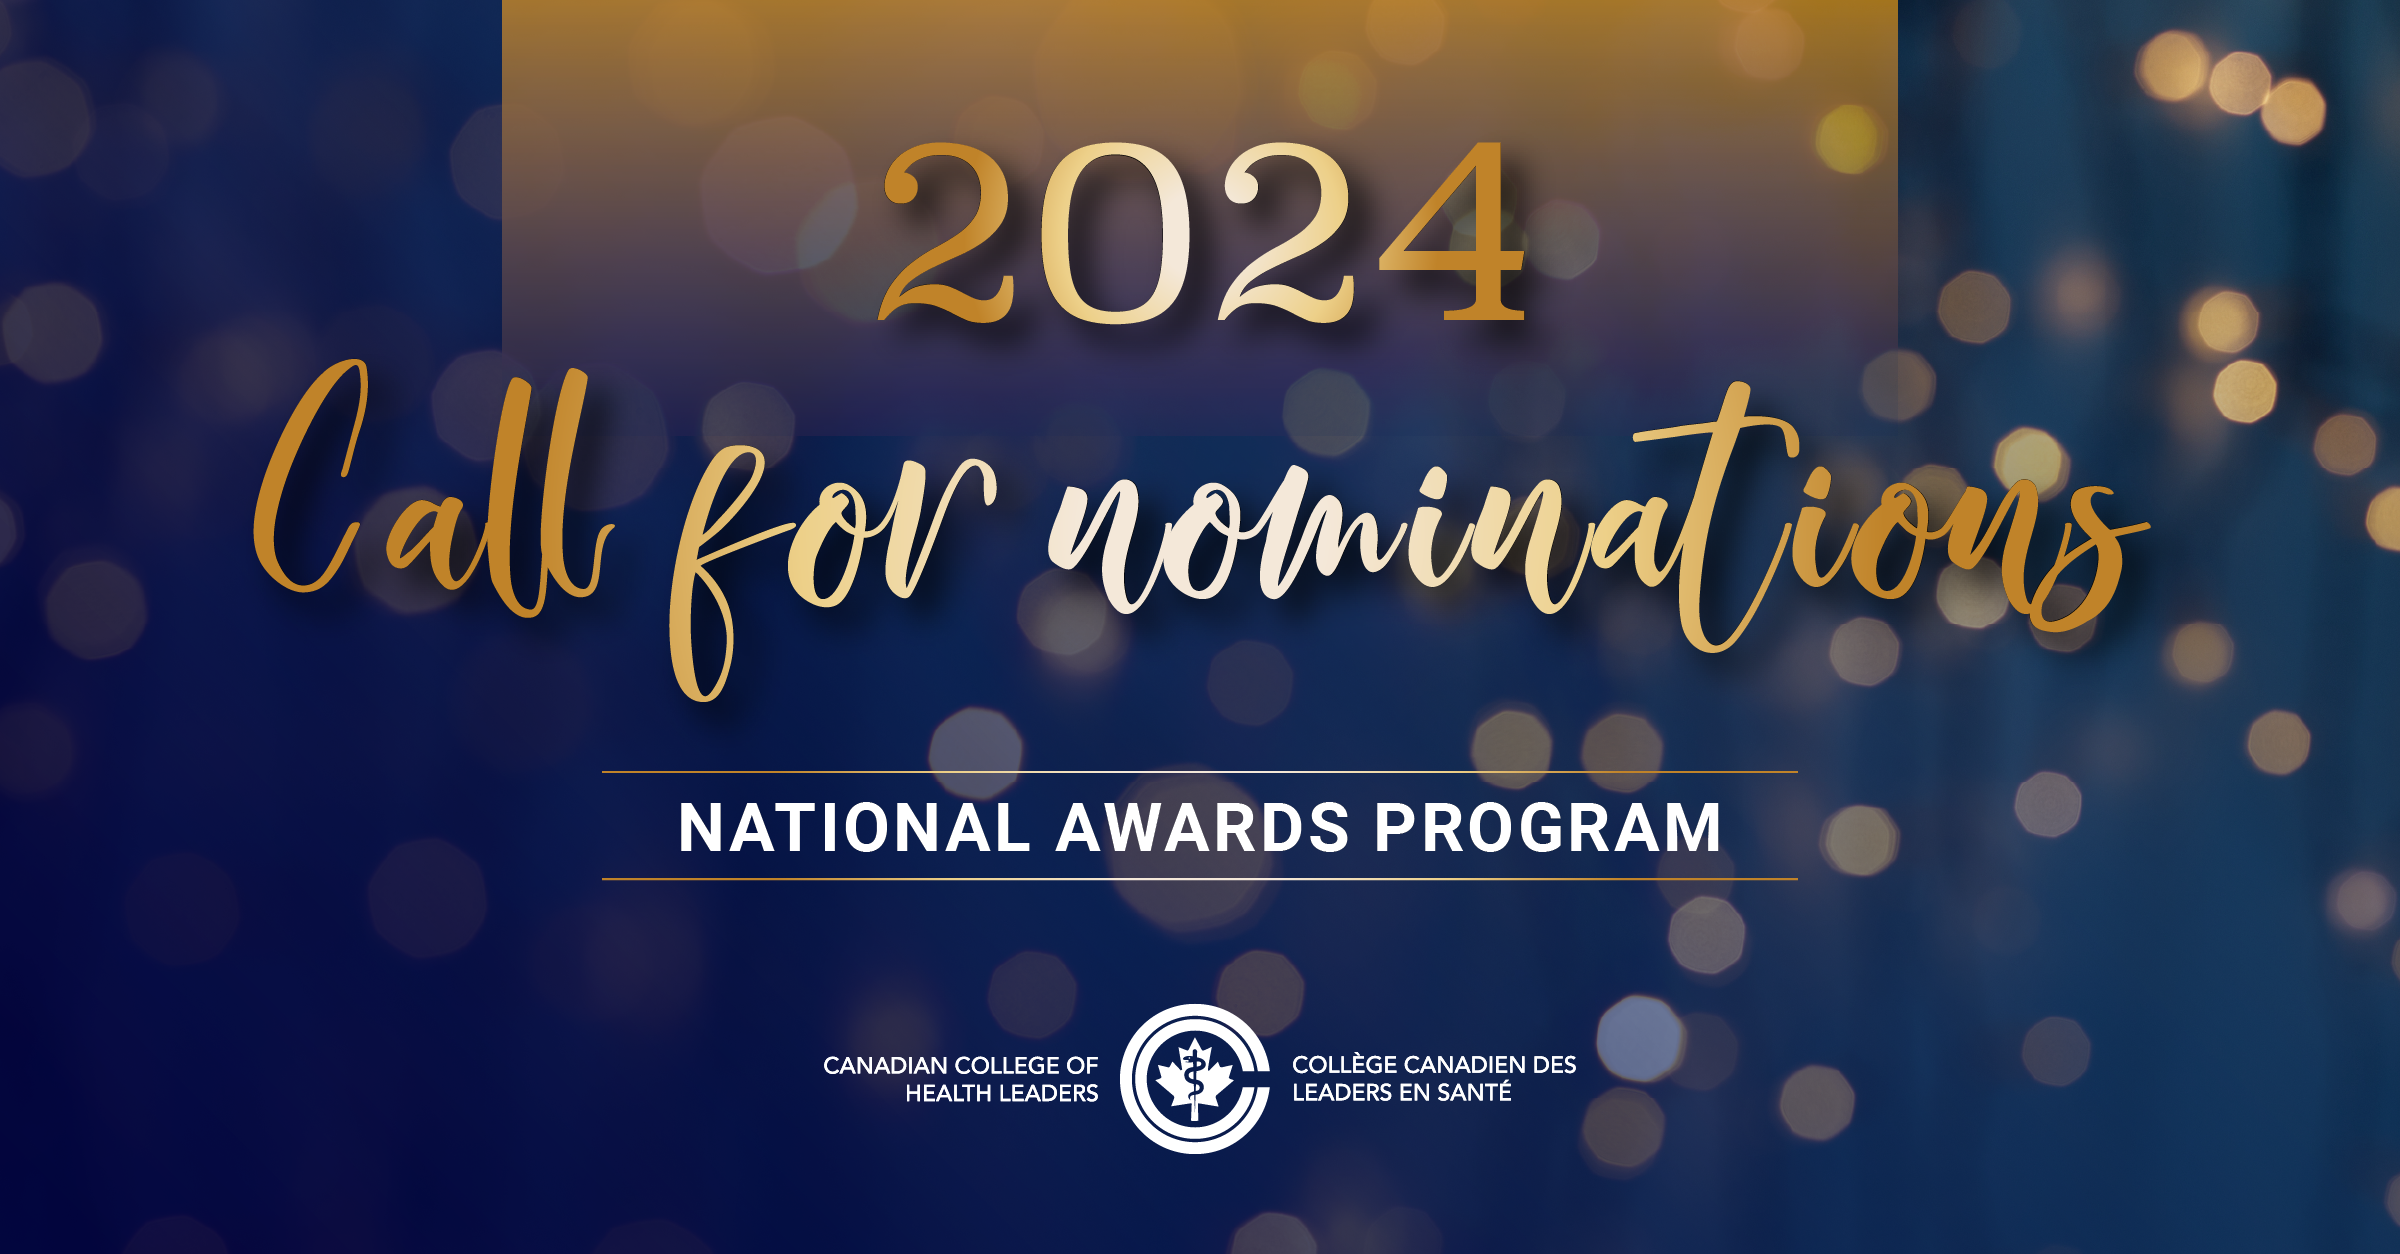 2024 Call for nominations